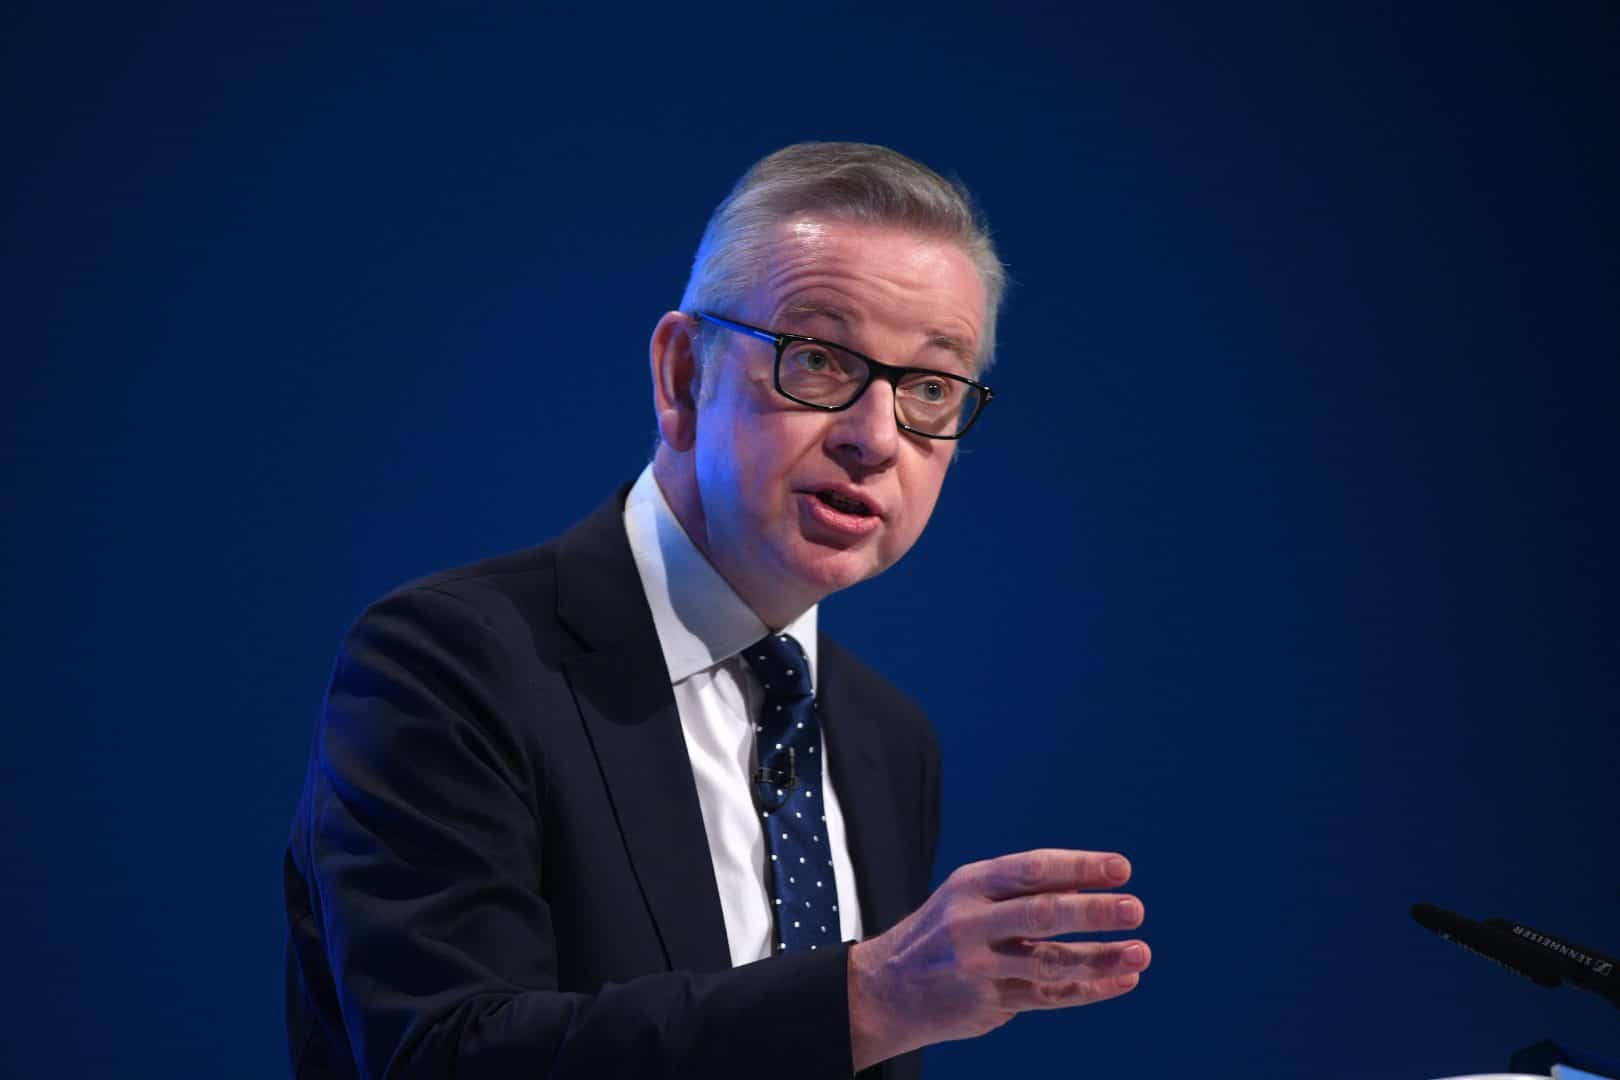 Import controls will begin as soon Brexit transition ends, says Gove